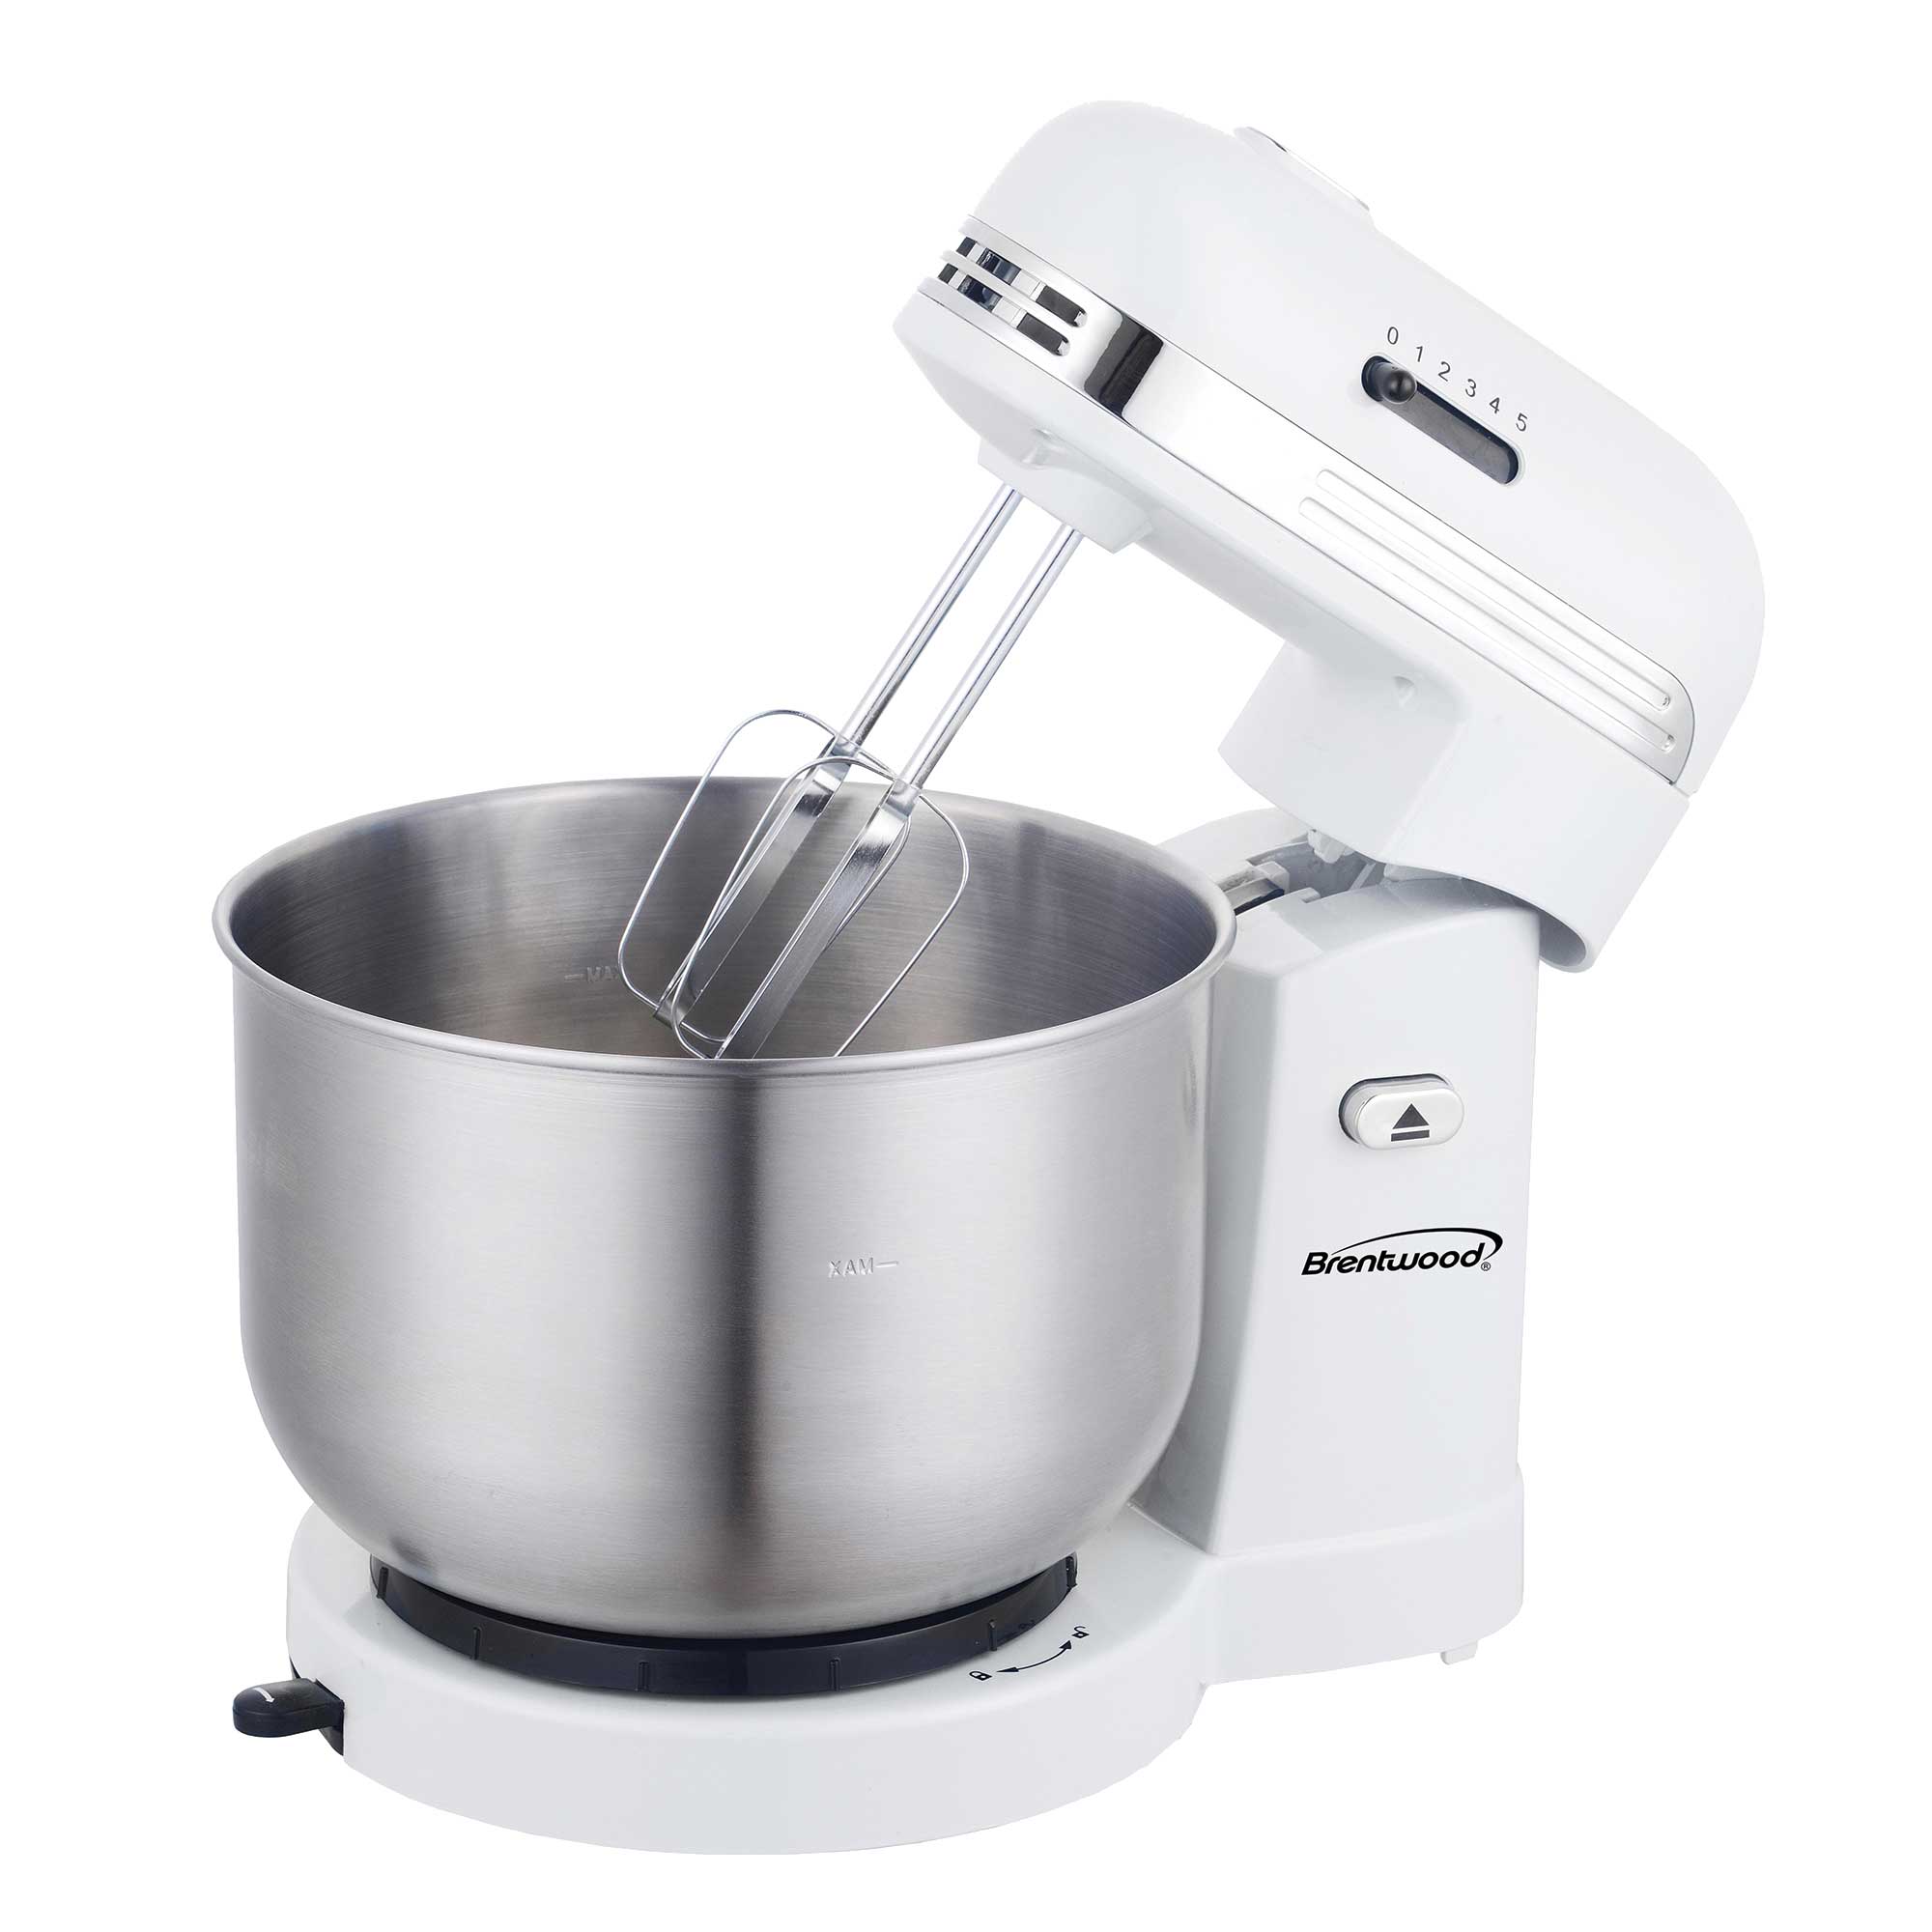 Brentwood SM-1162W 5-Speed Stand Mixer with 3.5 Quart Stainless Steel Mixing Bowl, White